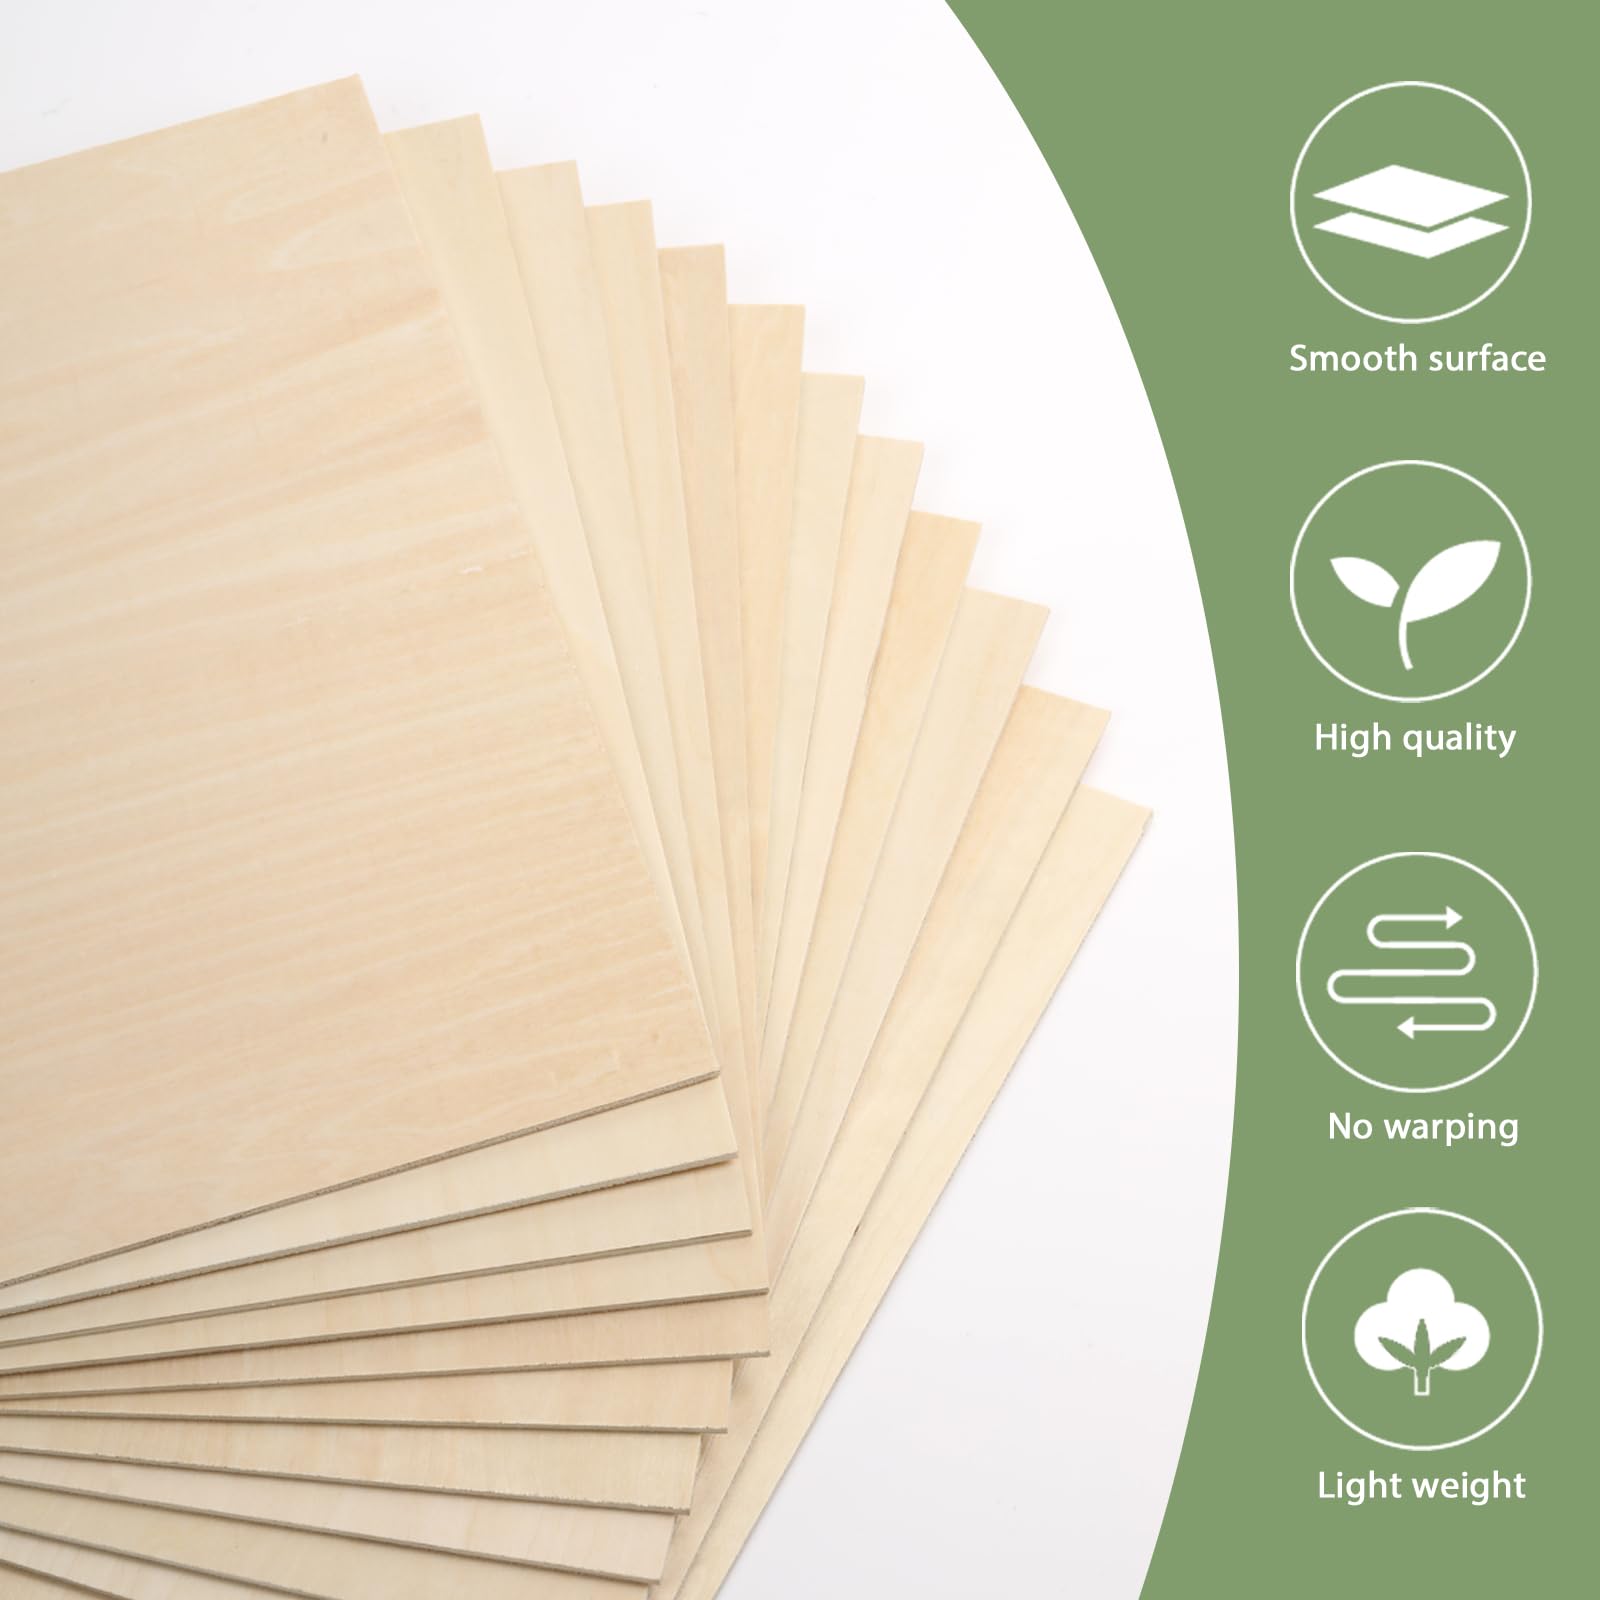 36 Pack Basswood Sheets 12x12x1/8 Inch for Crafts，Unfinished Wood for Laser Cutting & Engraving，Wood Burining，Plywood for Architectural Models.